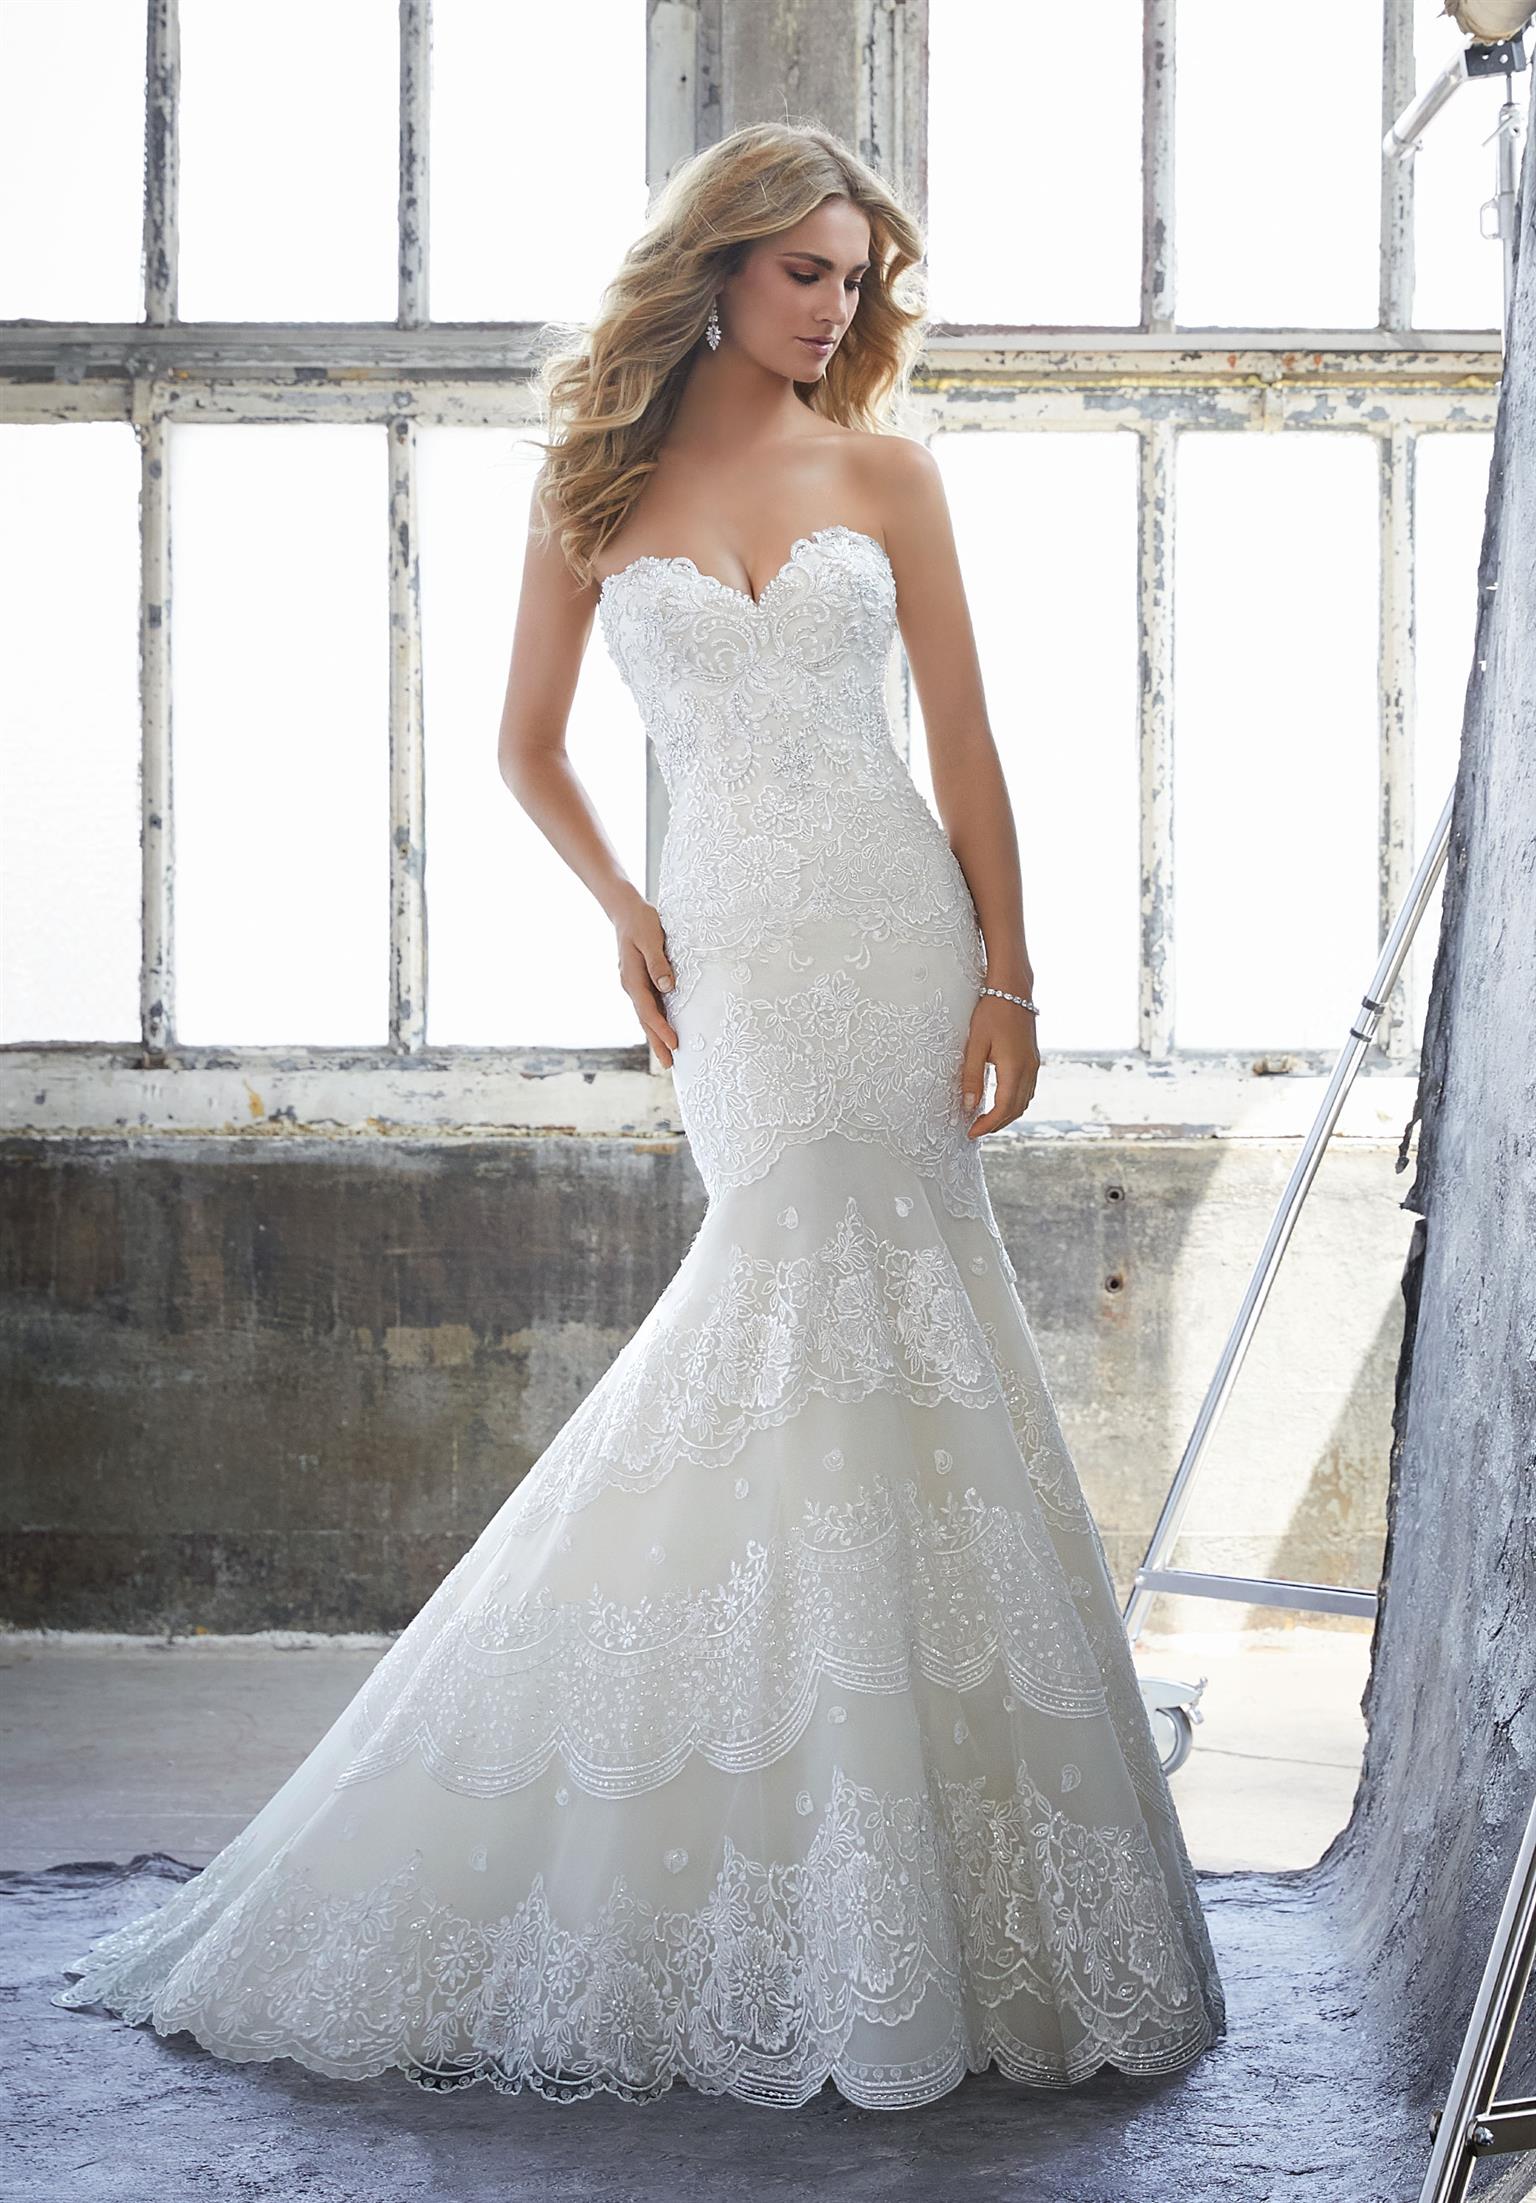 Wholesalers and importers of international designer wedding gowns